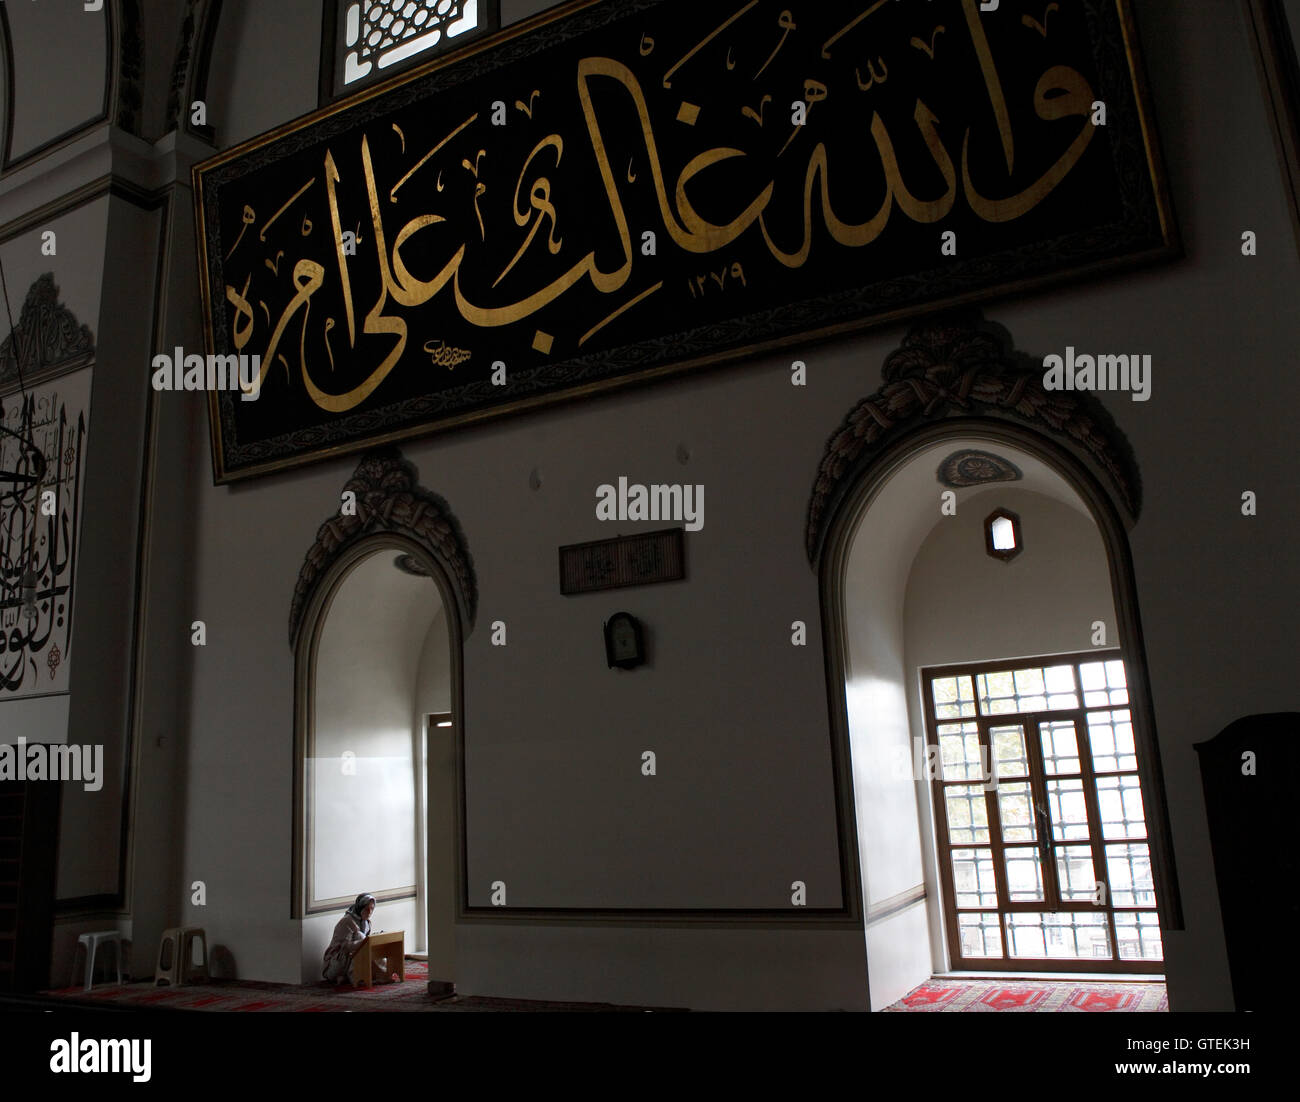 'Istanbul #1' Mosque interior. Woman worshiper in background. Stock Photo